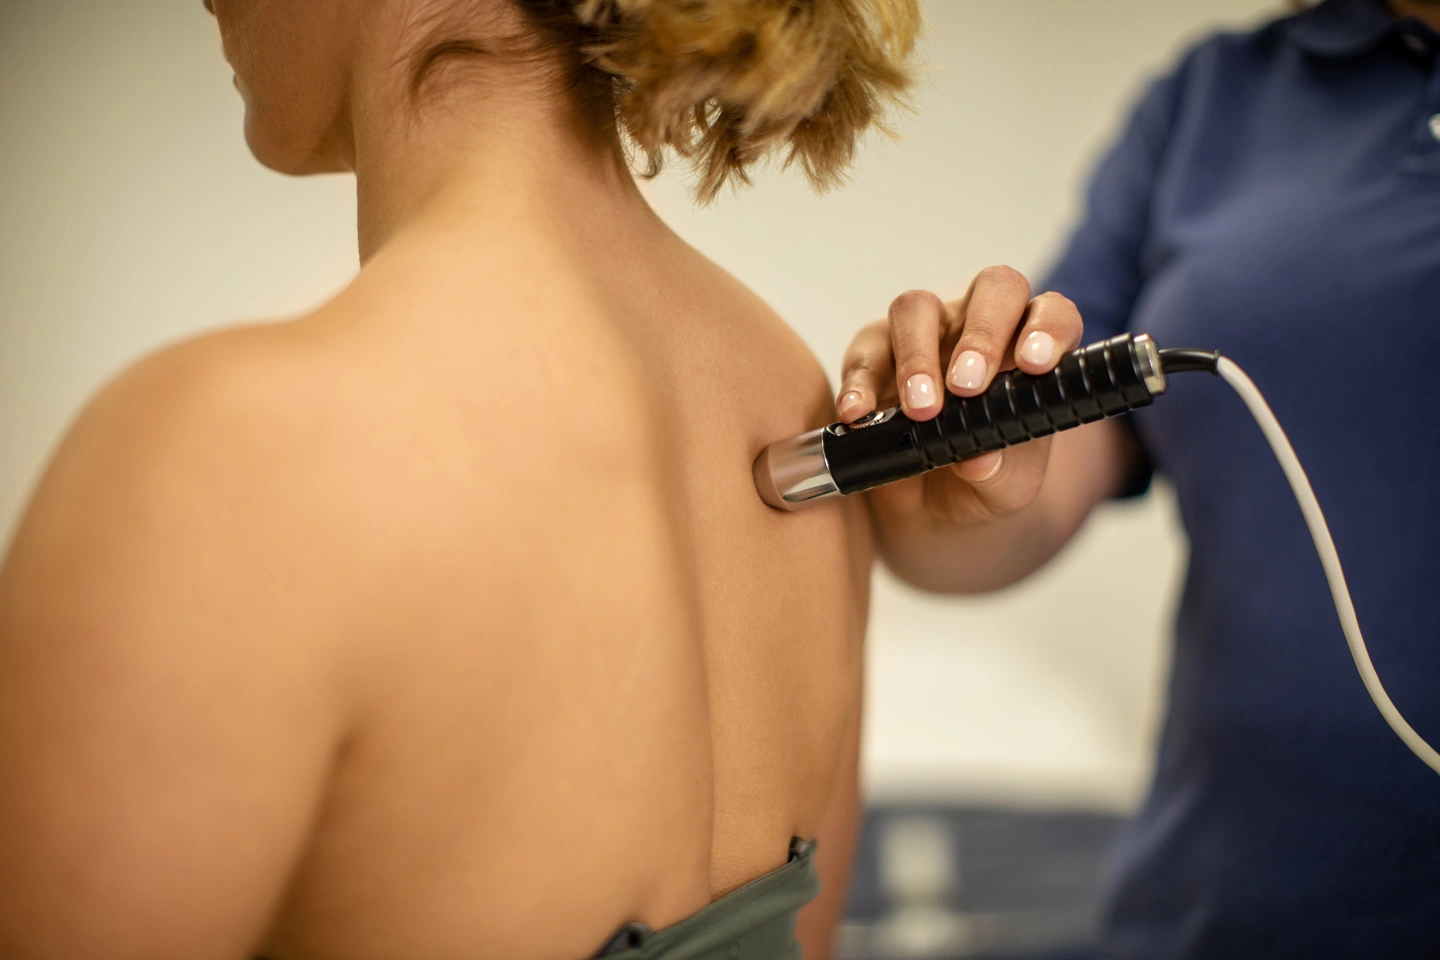 A chiropractor administering laser therapy treatment to a patient's lower back in a clinical setting. The patient is comfortably lying on a treatment table while the chiropractor directs the therapeutic laser device towards the targeted area, highlighting advanced treatment options in chiropractic care